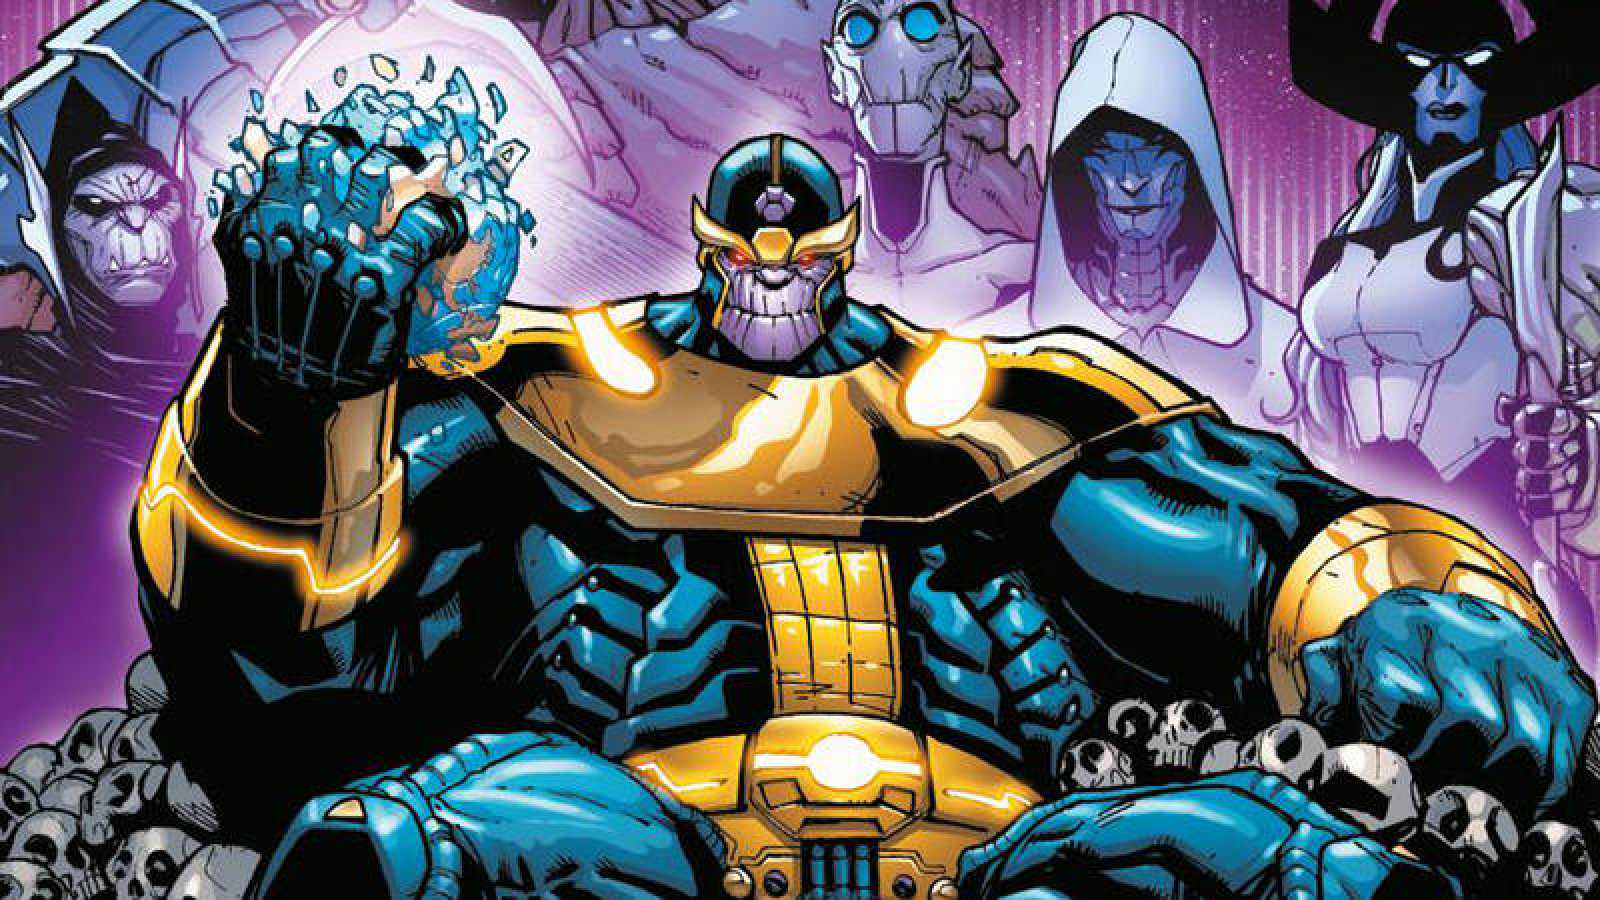 Here's How Thanos Was Defeated in the Infinity Gauntlet Saga